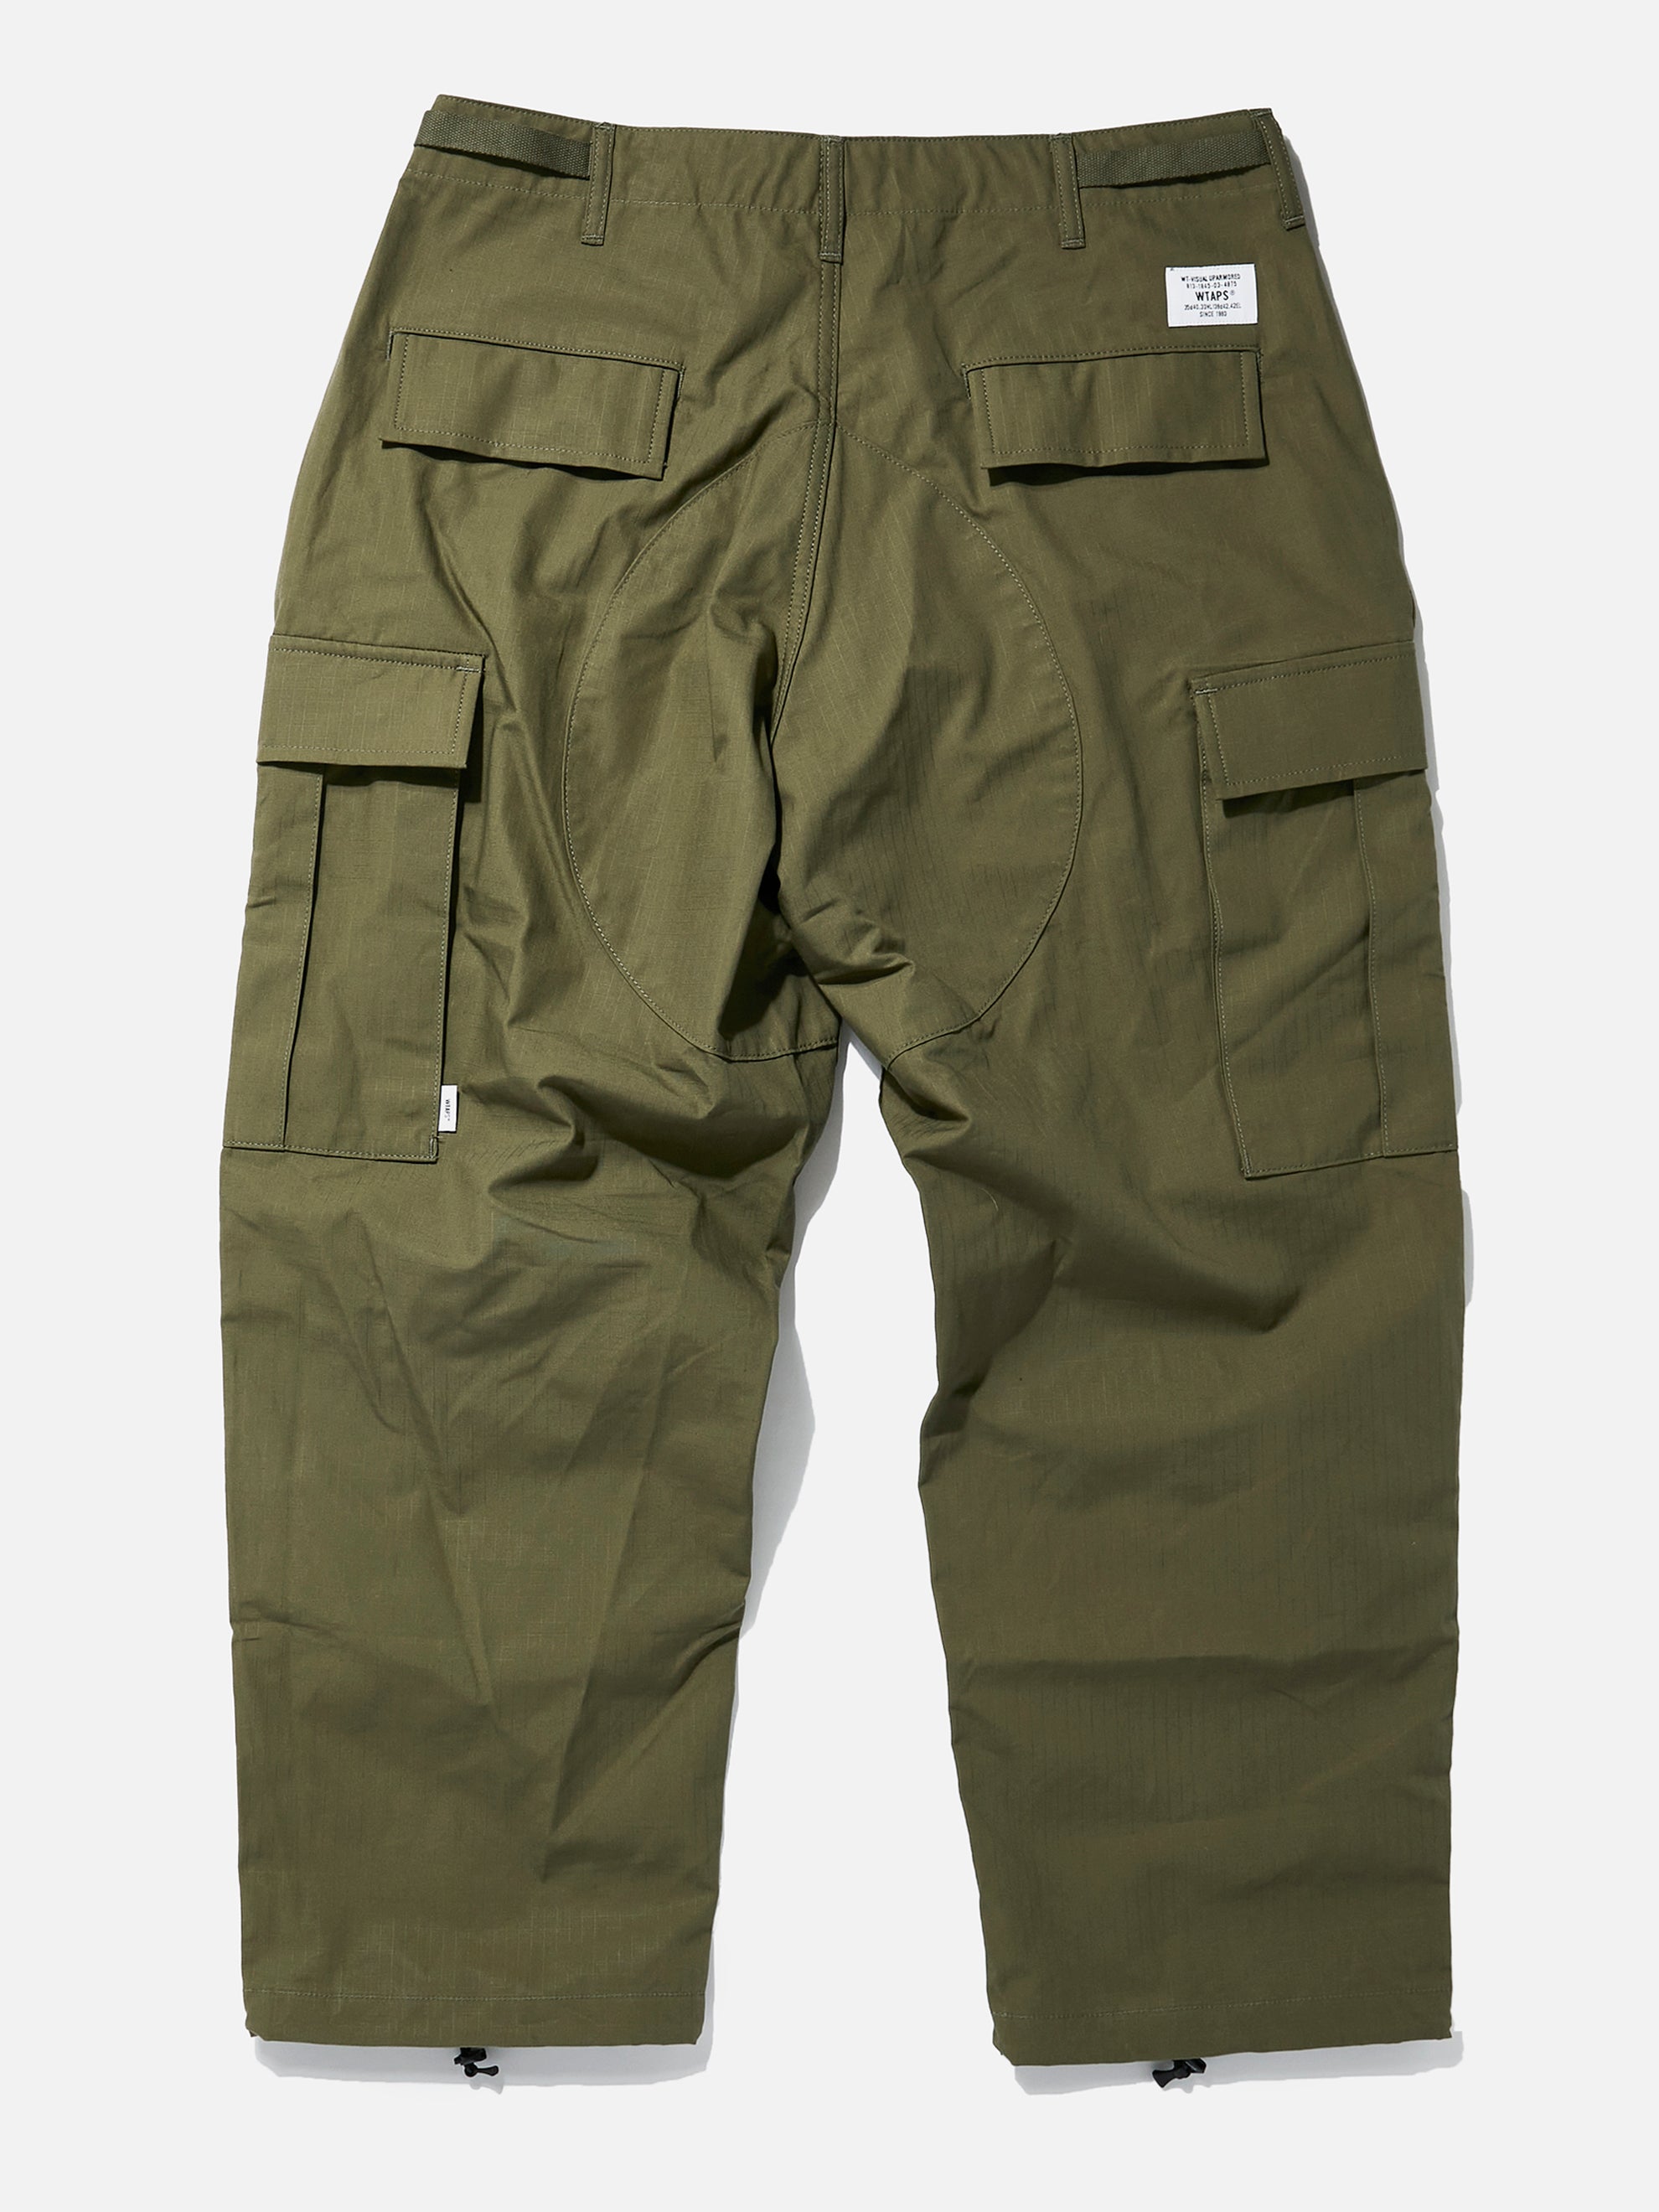 TROUSERS 15 (Olive Drab)